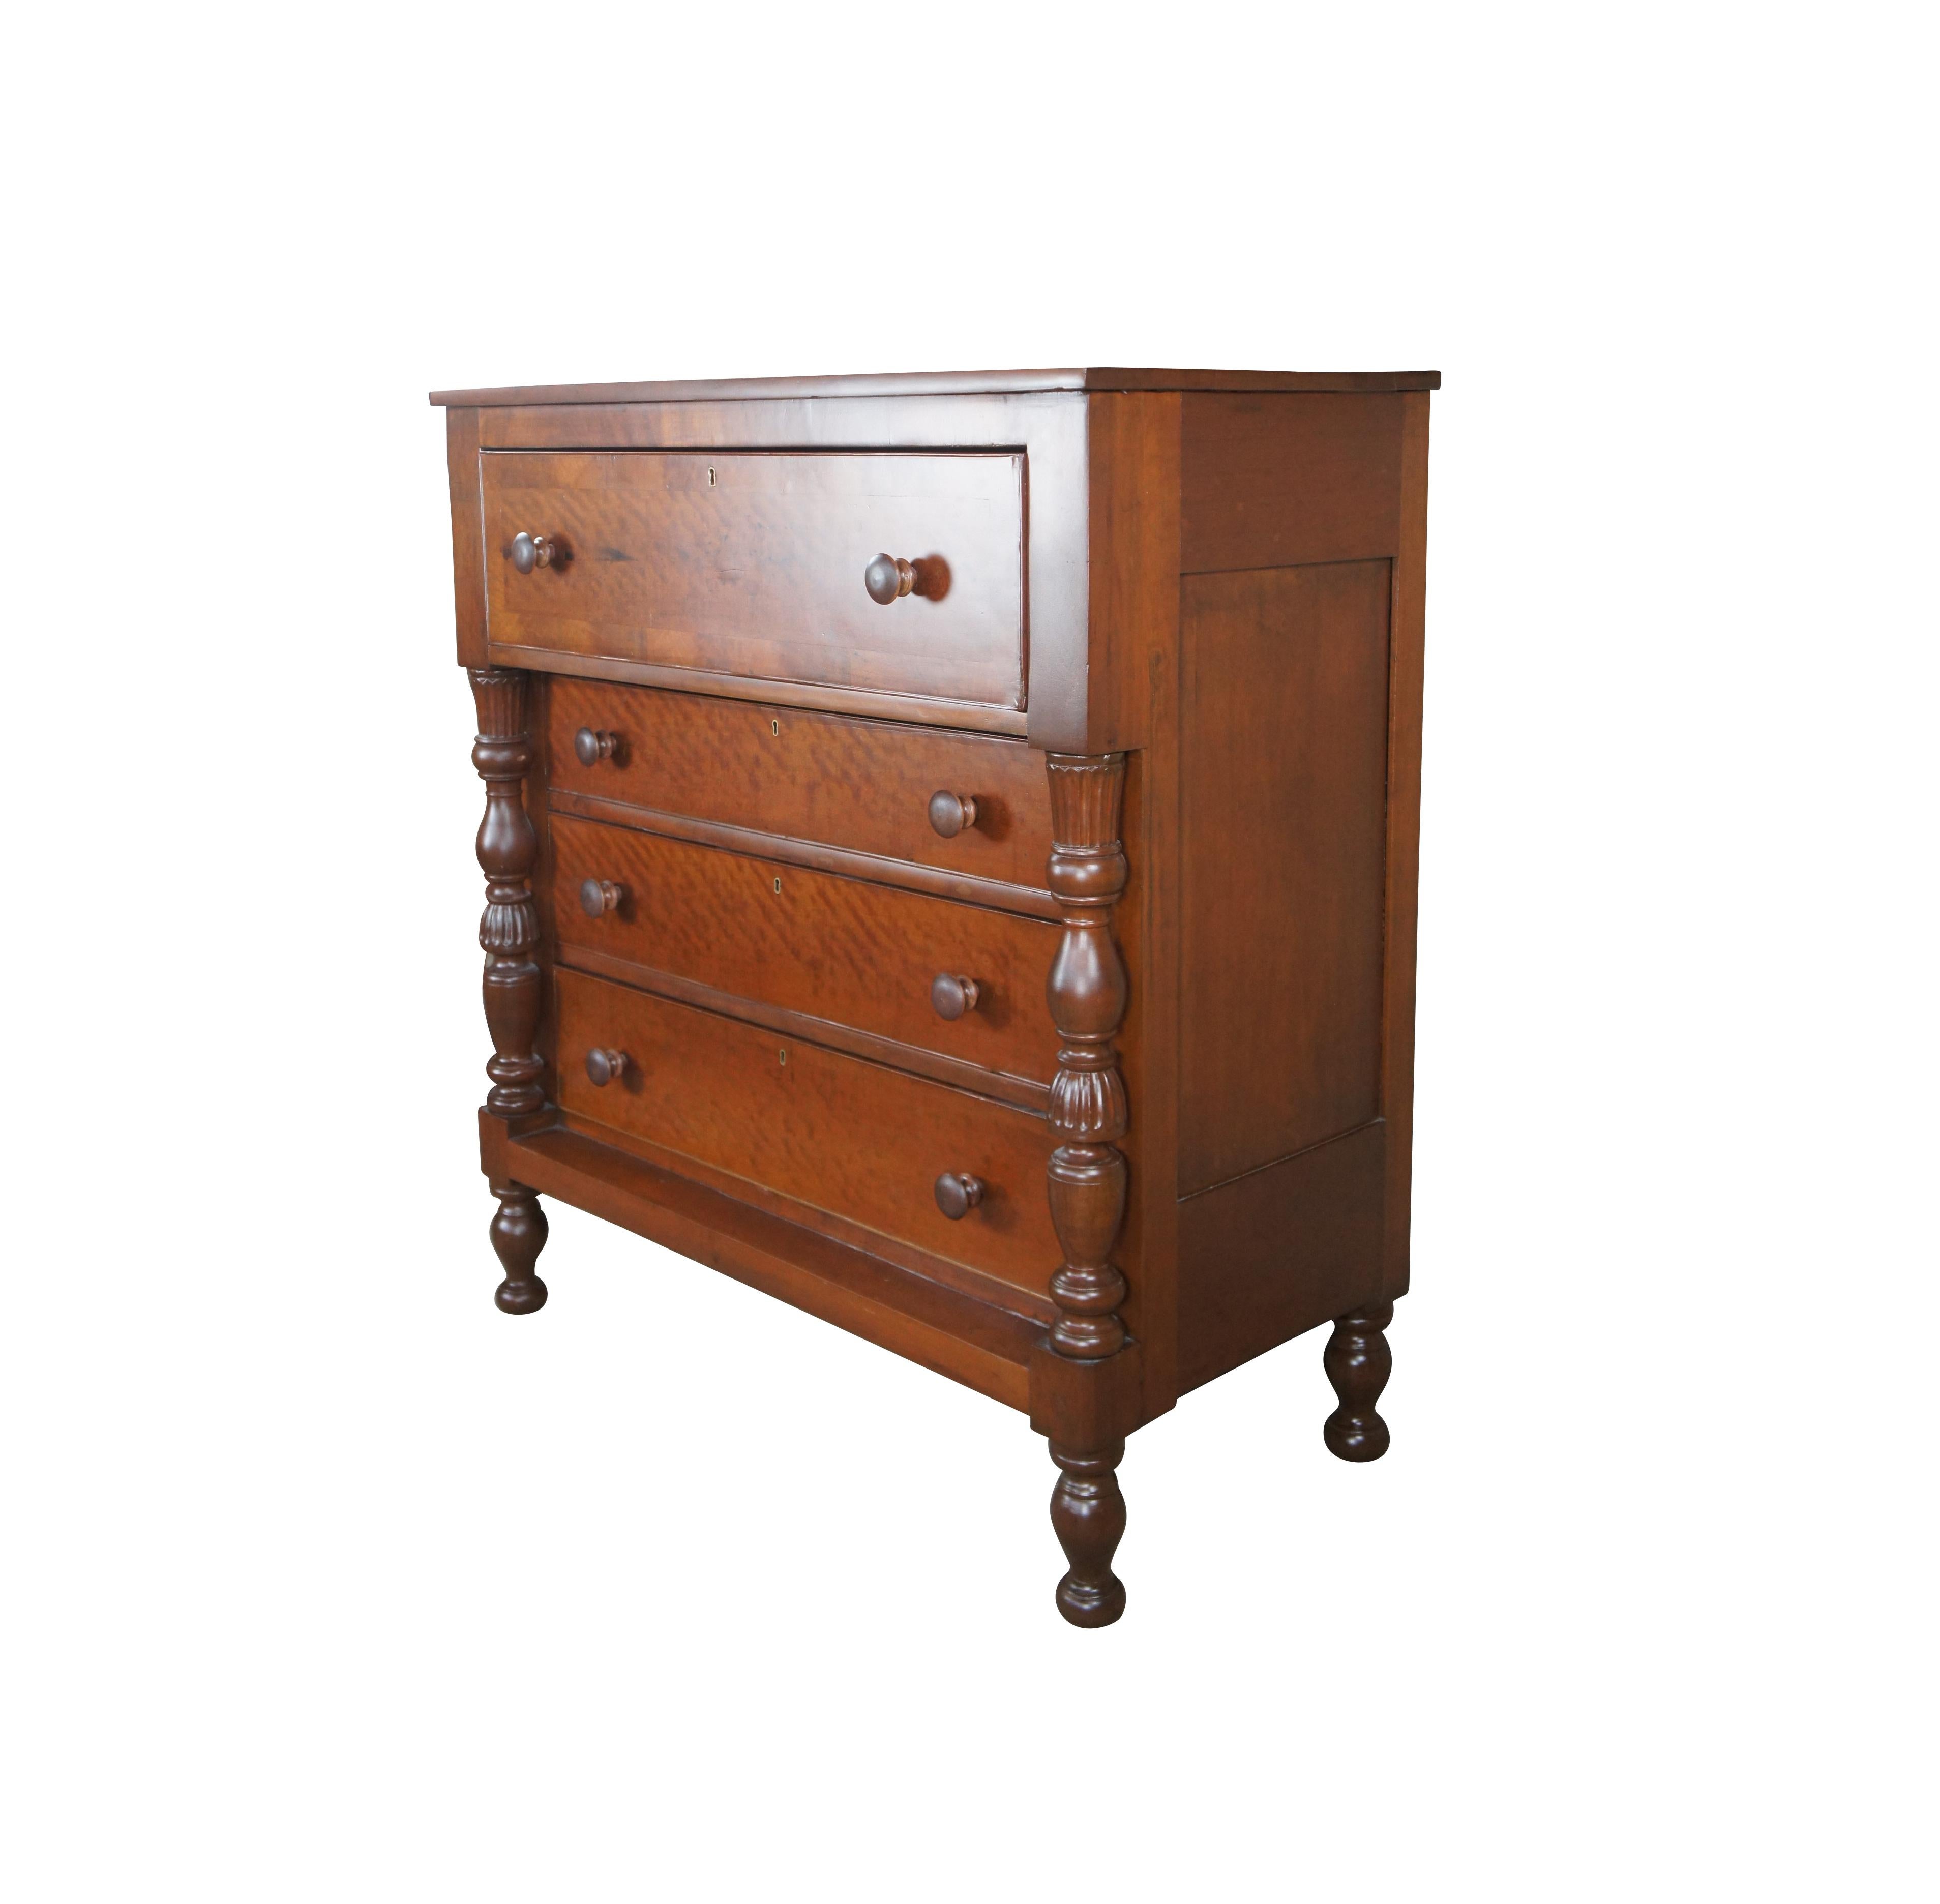 A large and impressive Victorian chest of drawers, circa 1870s. Made from Cherry with walnut banding. Features 4 hand dovetailed drawers with a pronounced top. The stiles showcase whole turned, fluted and ribbed columns. The case is raised over